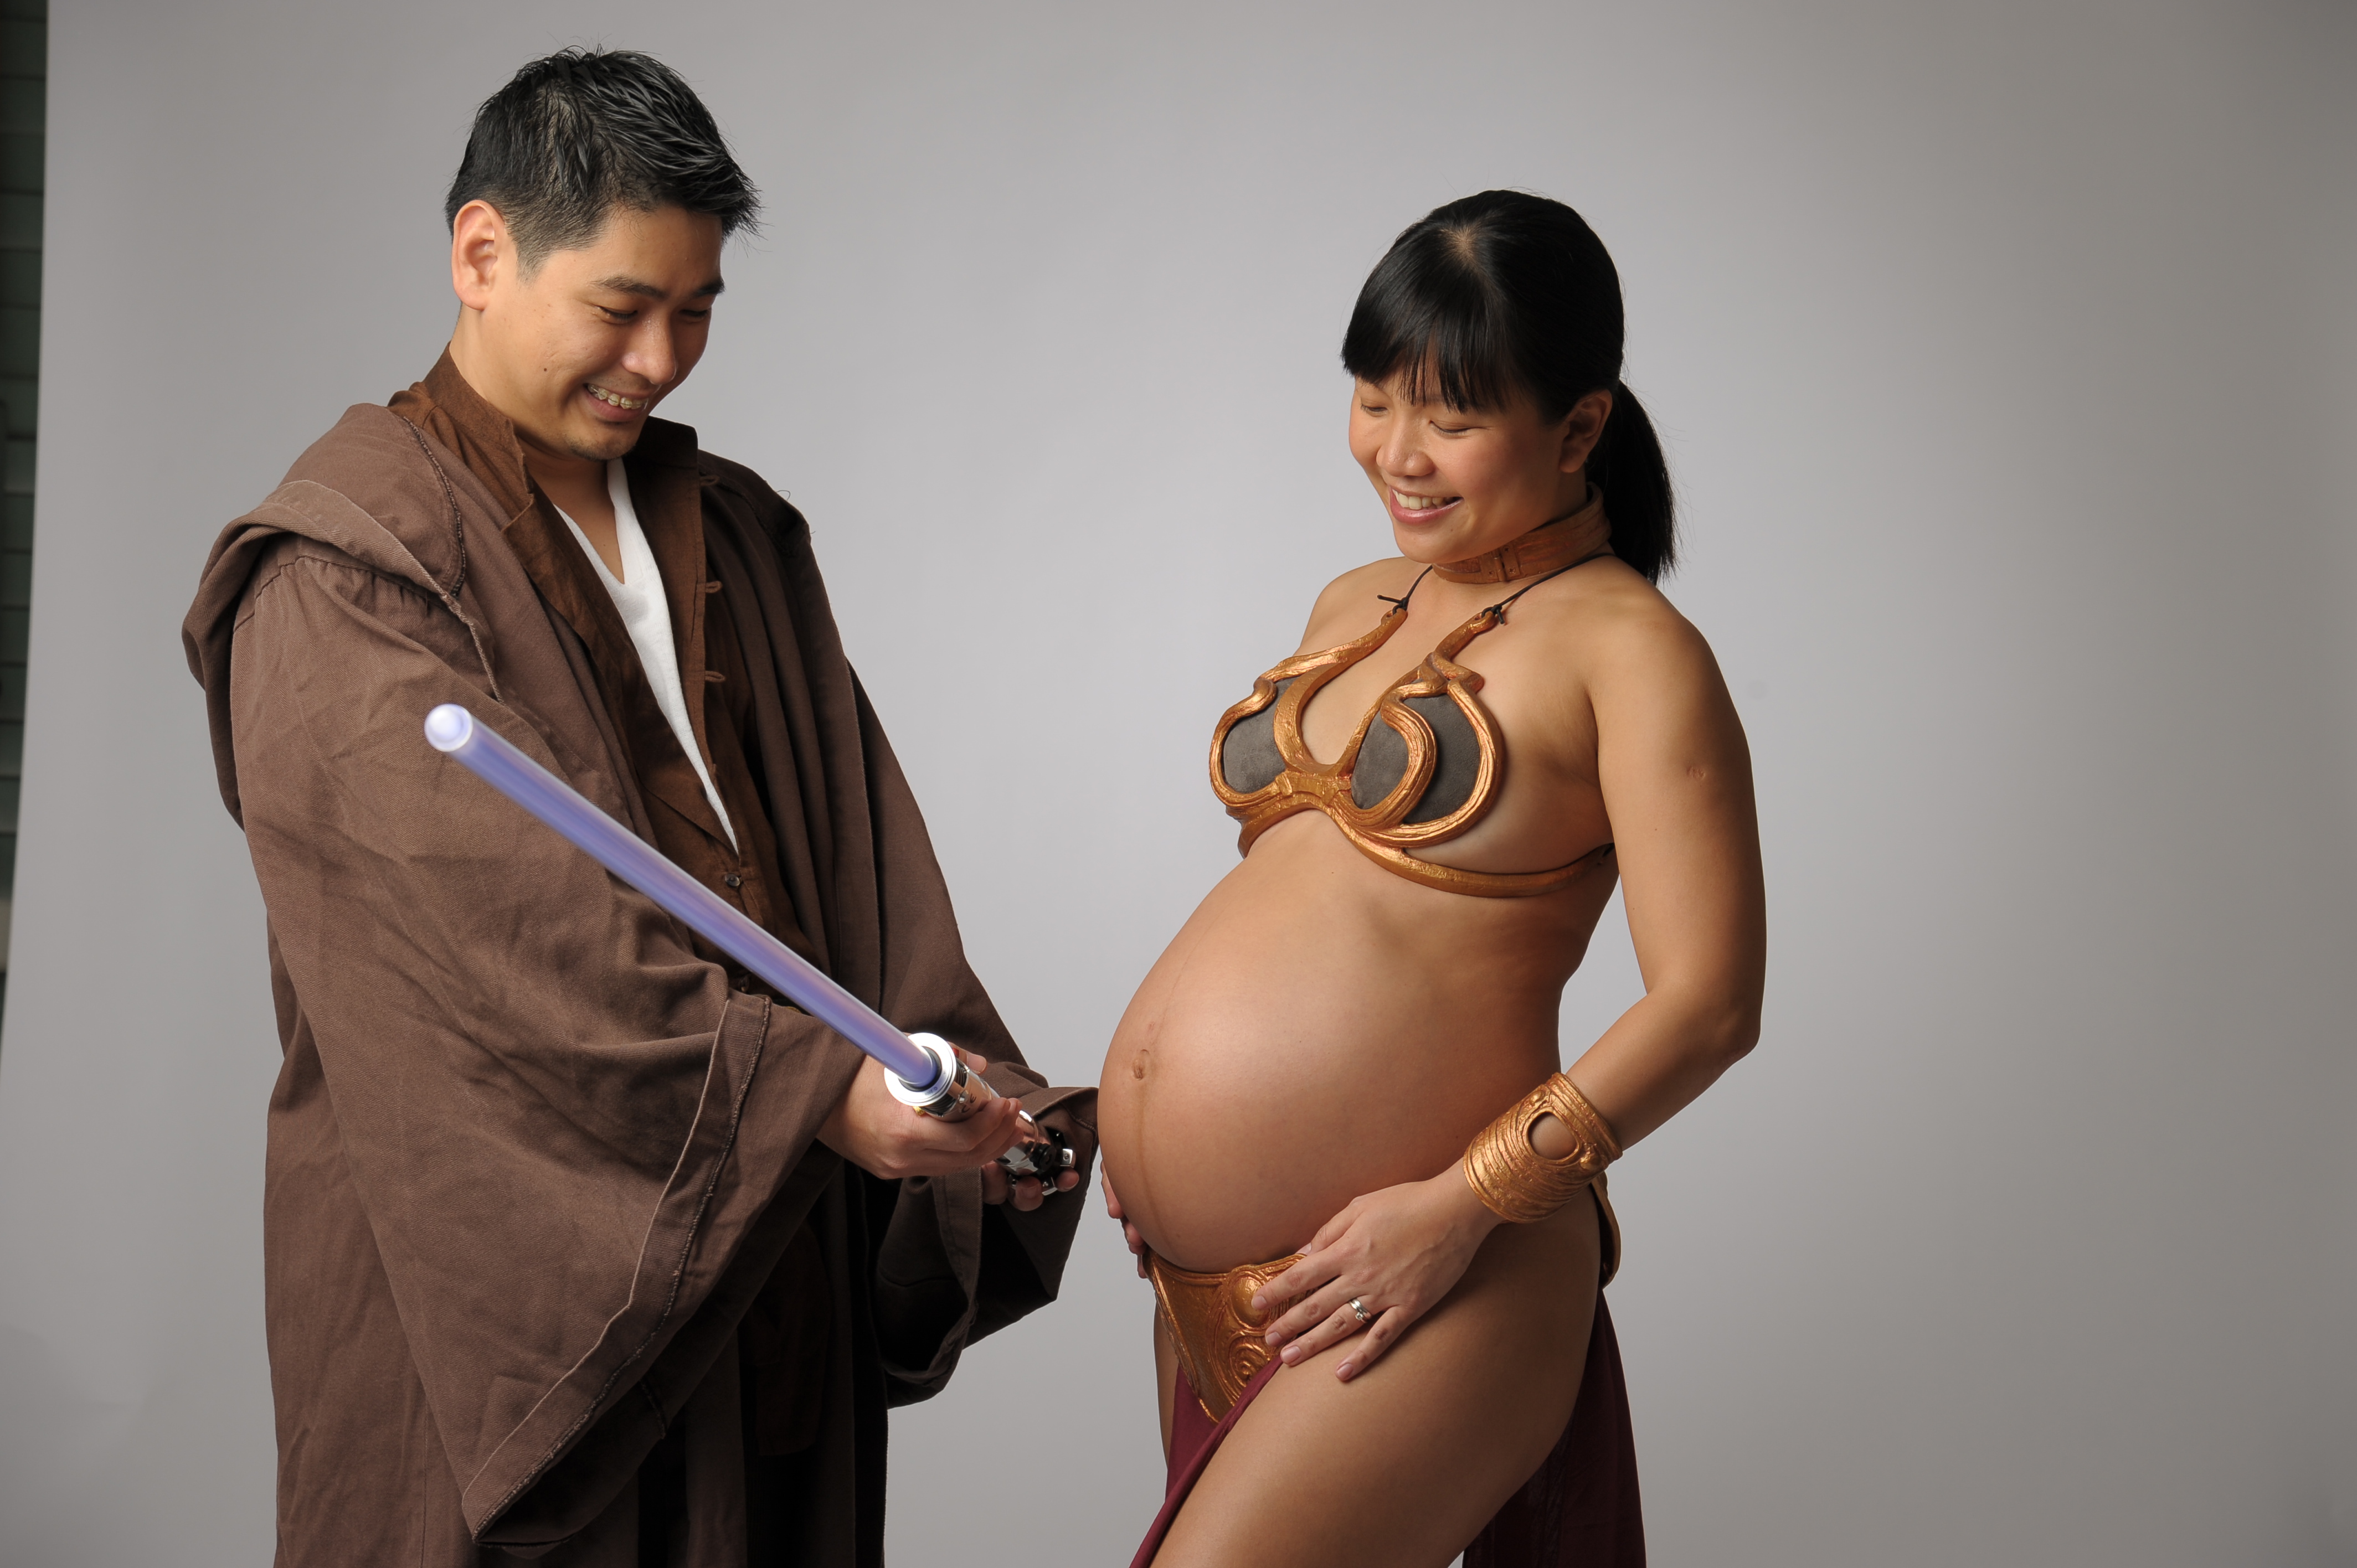 aaron troost recommends Pregnant Slave Princess Leia